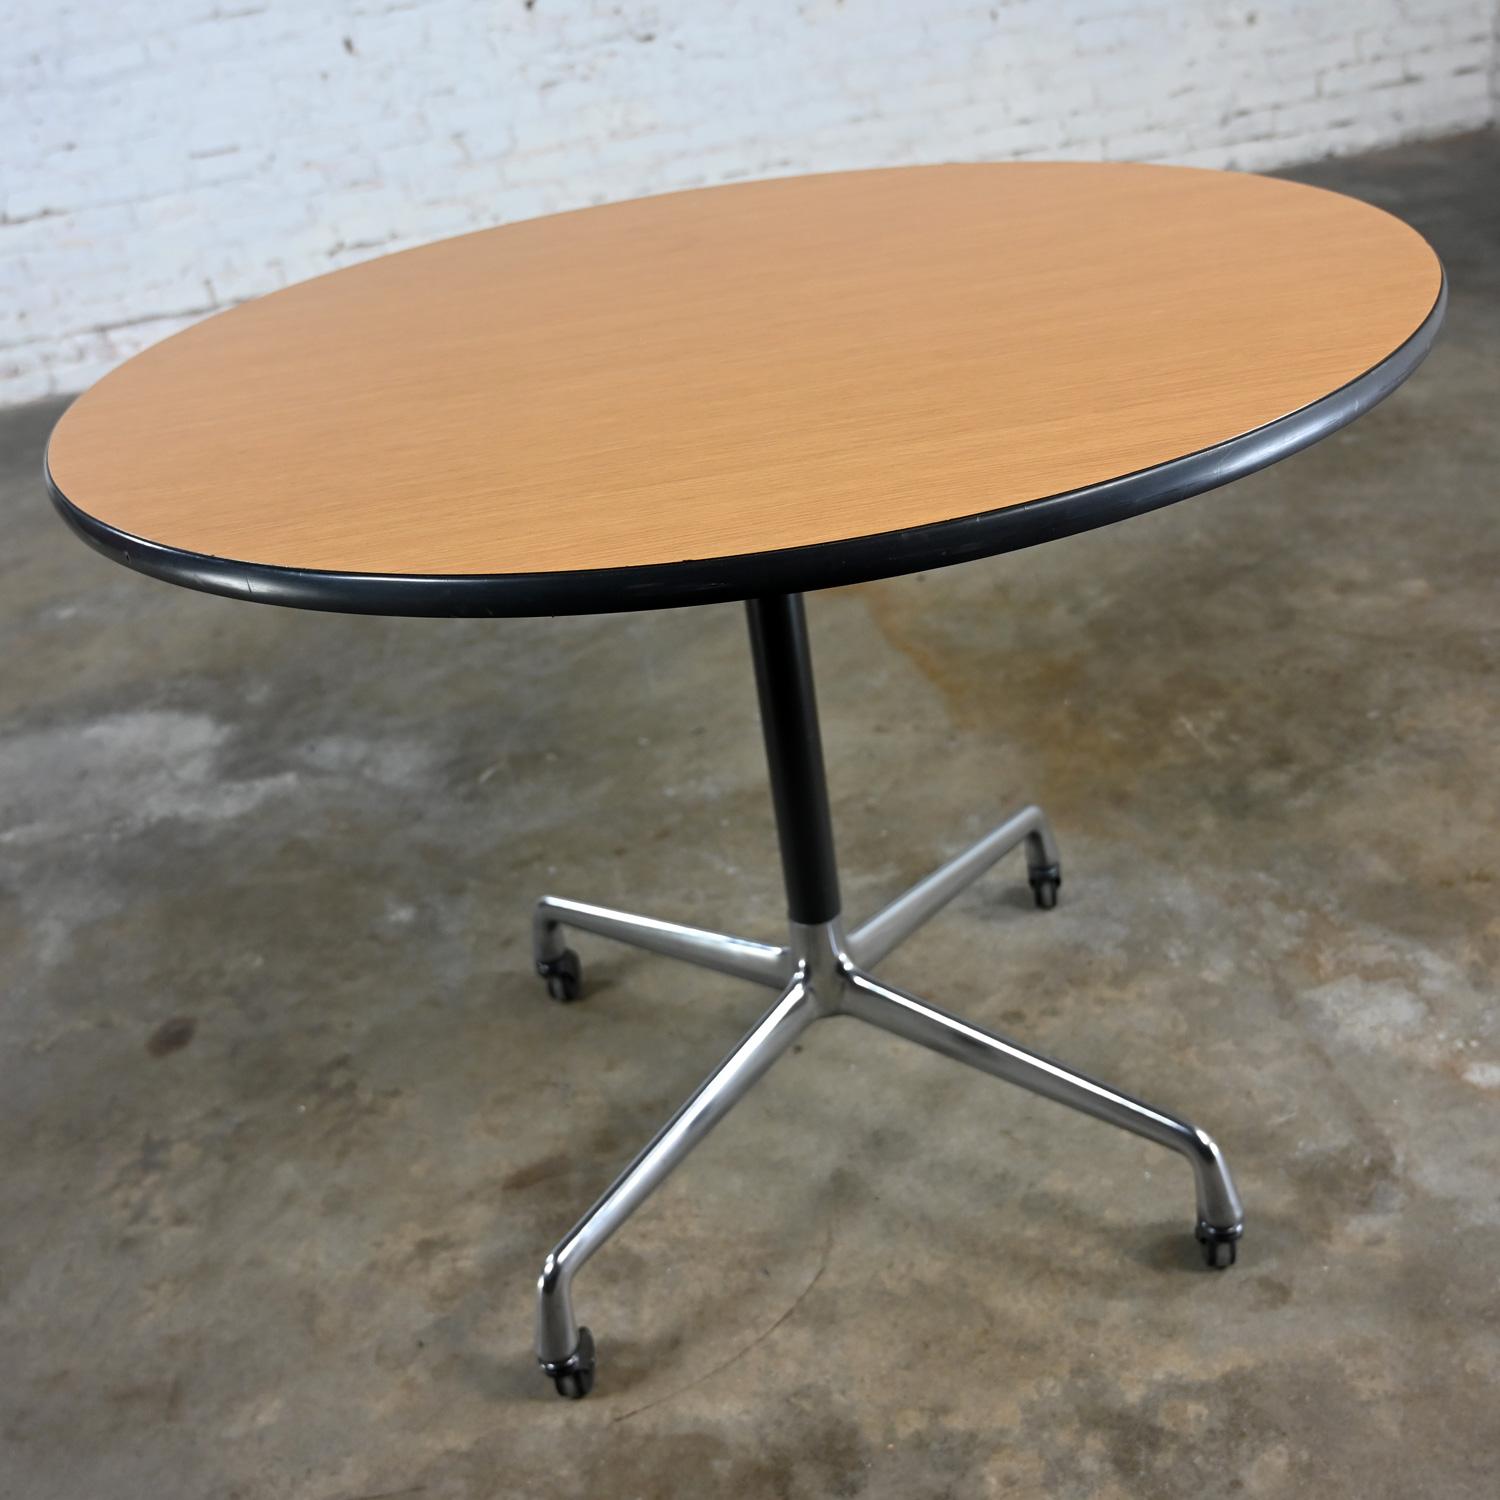 Eames Herman Miller Round Table Universal Base Casters & 36” Blonde Laminate Top In Good Condition For Sale In Topeka, KS